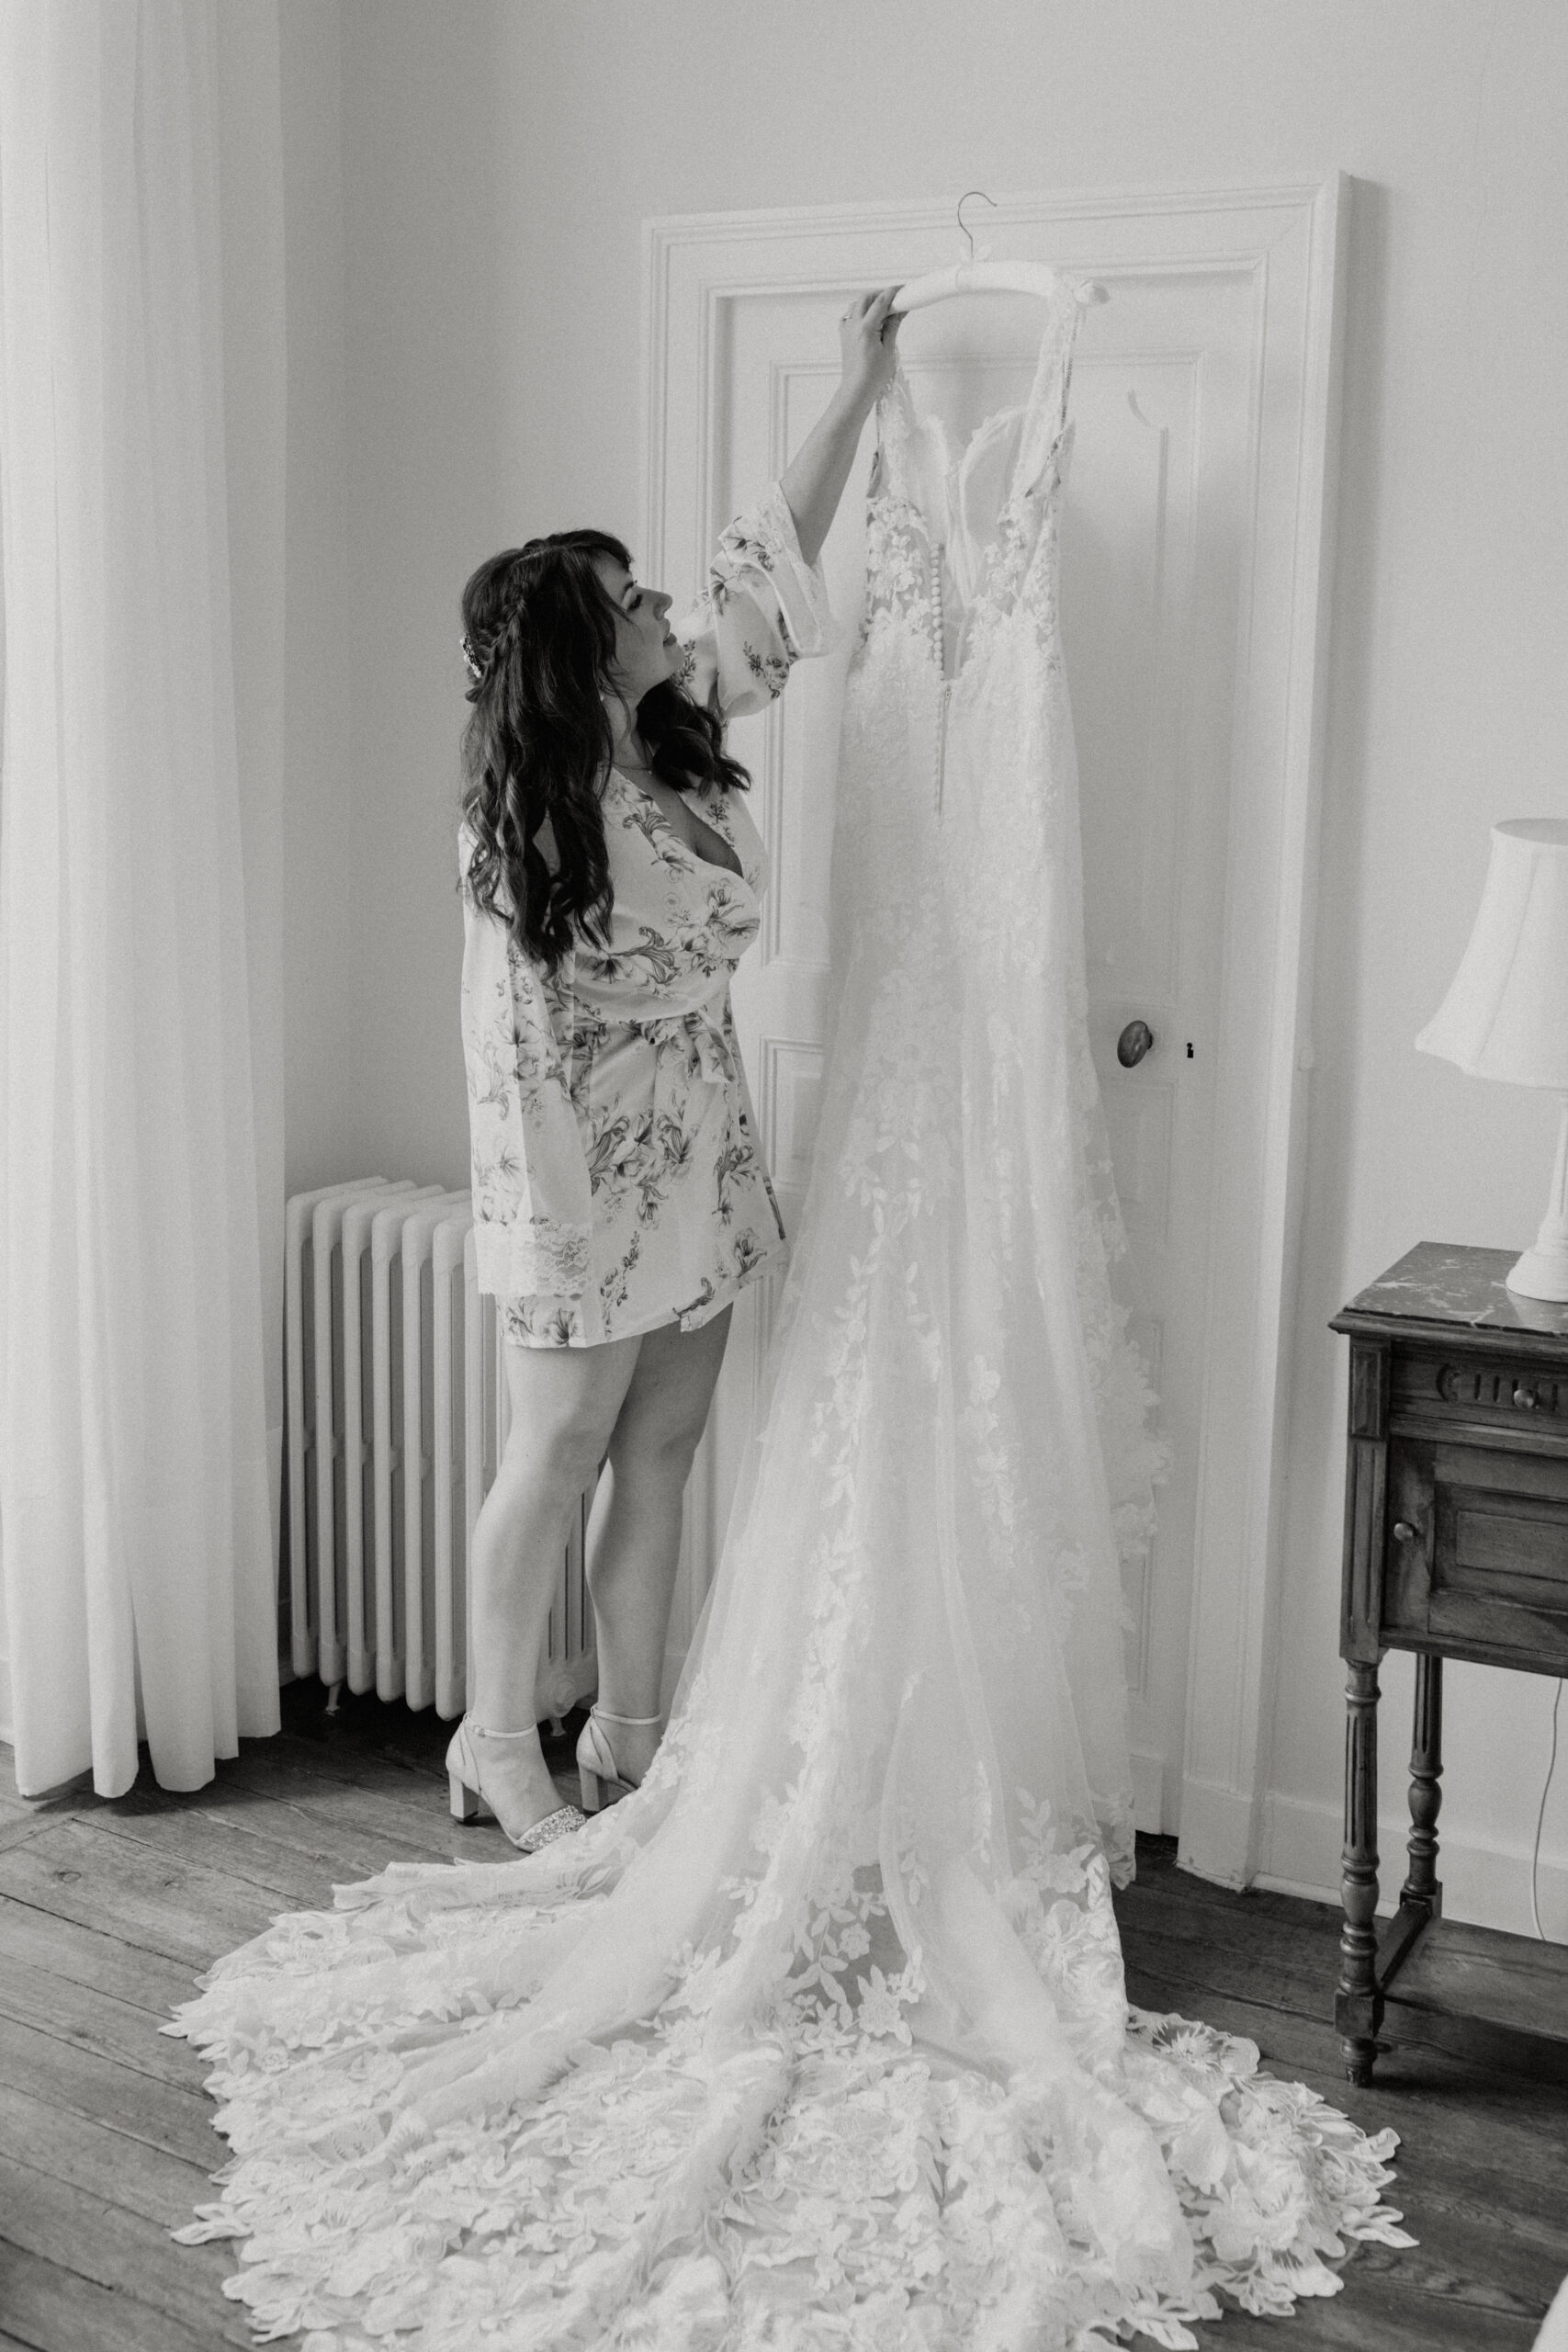 A woman in a robe reaches up to grab a lacy wedding dress hanging from a door.